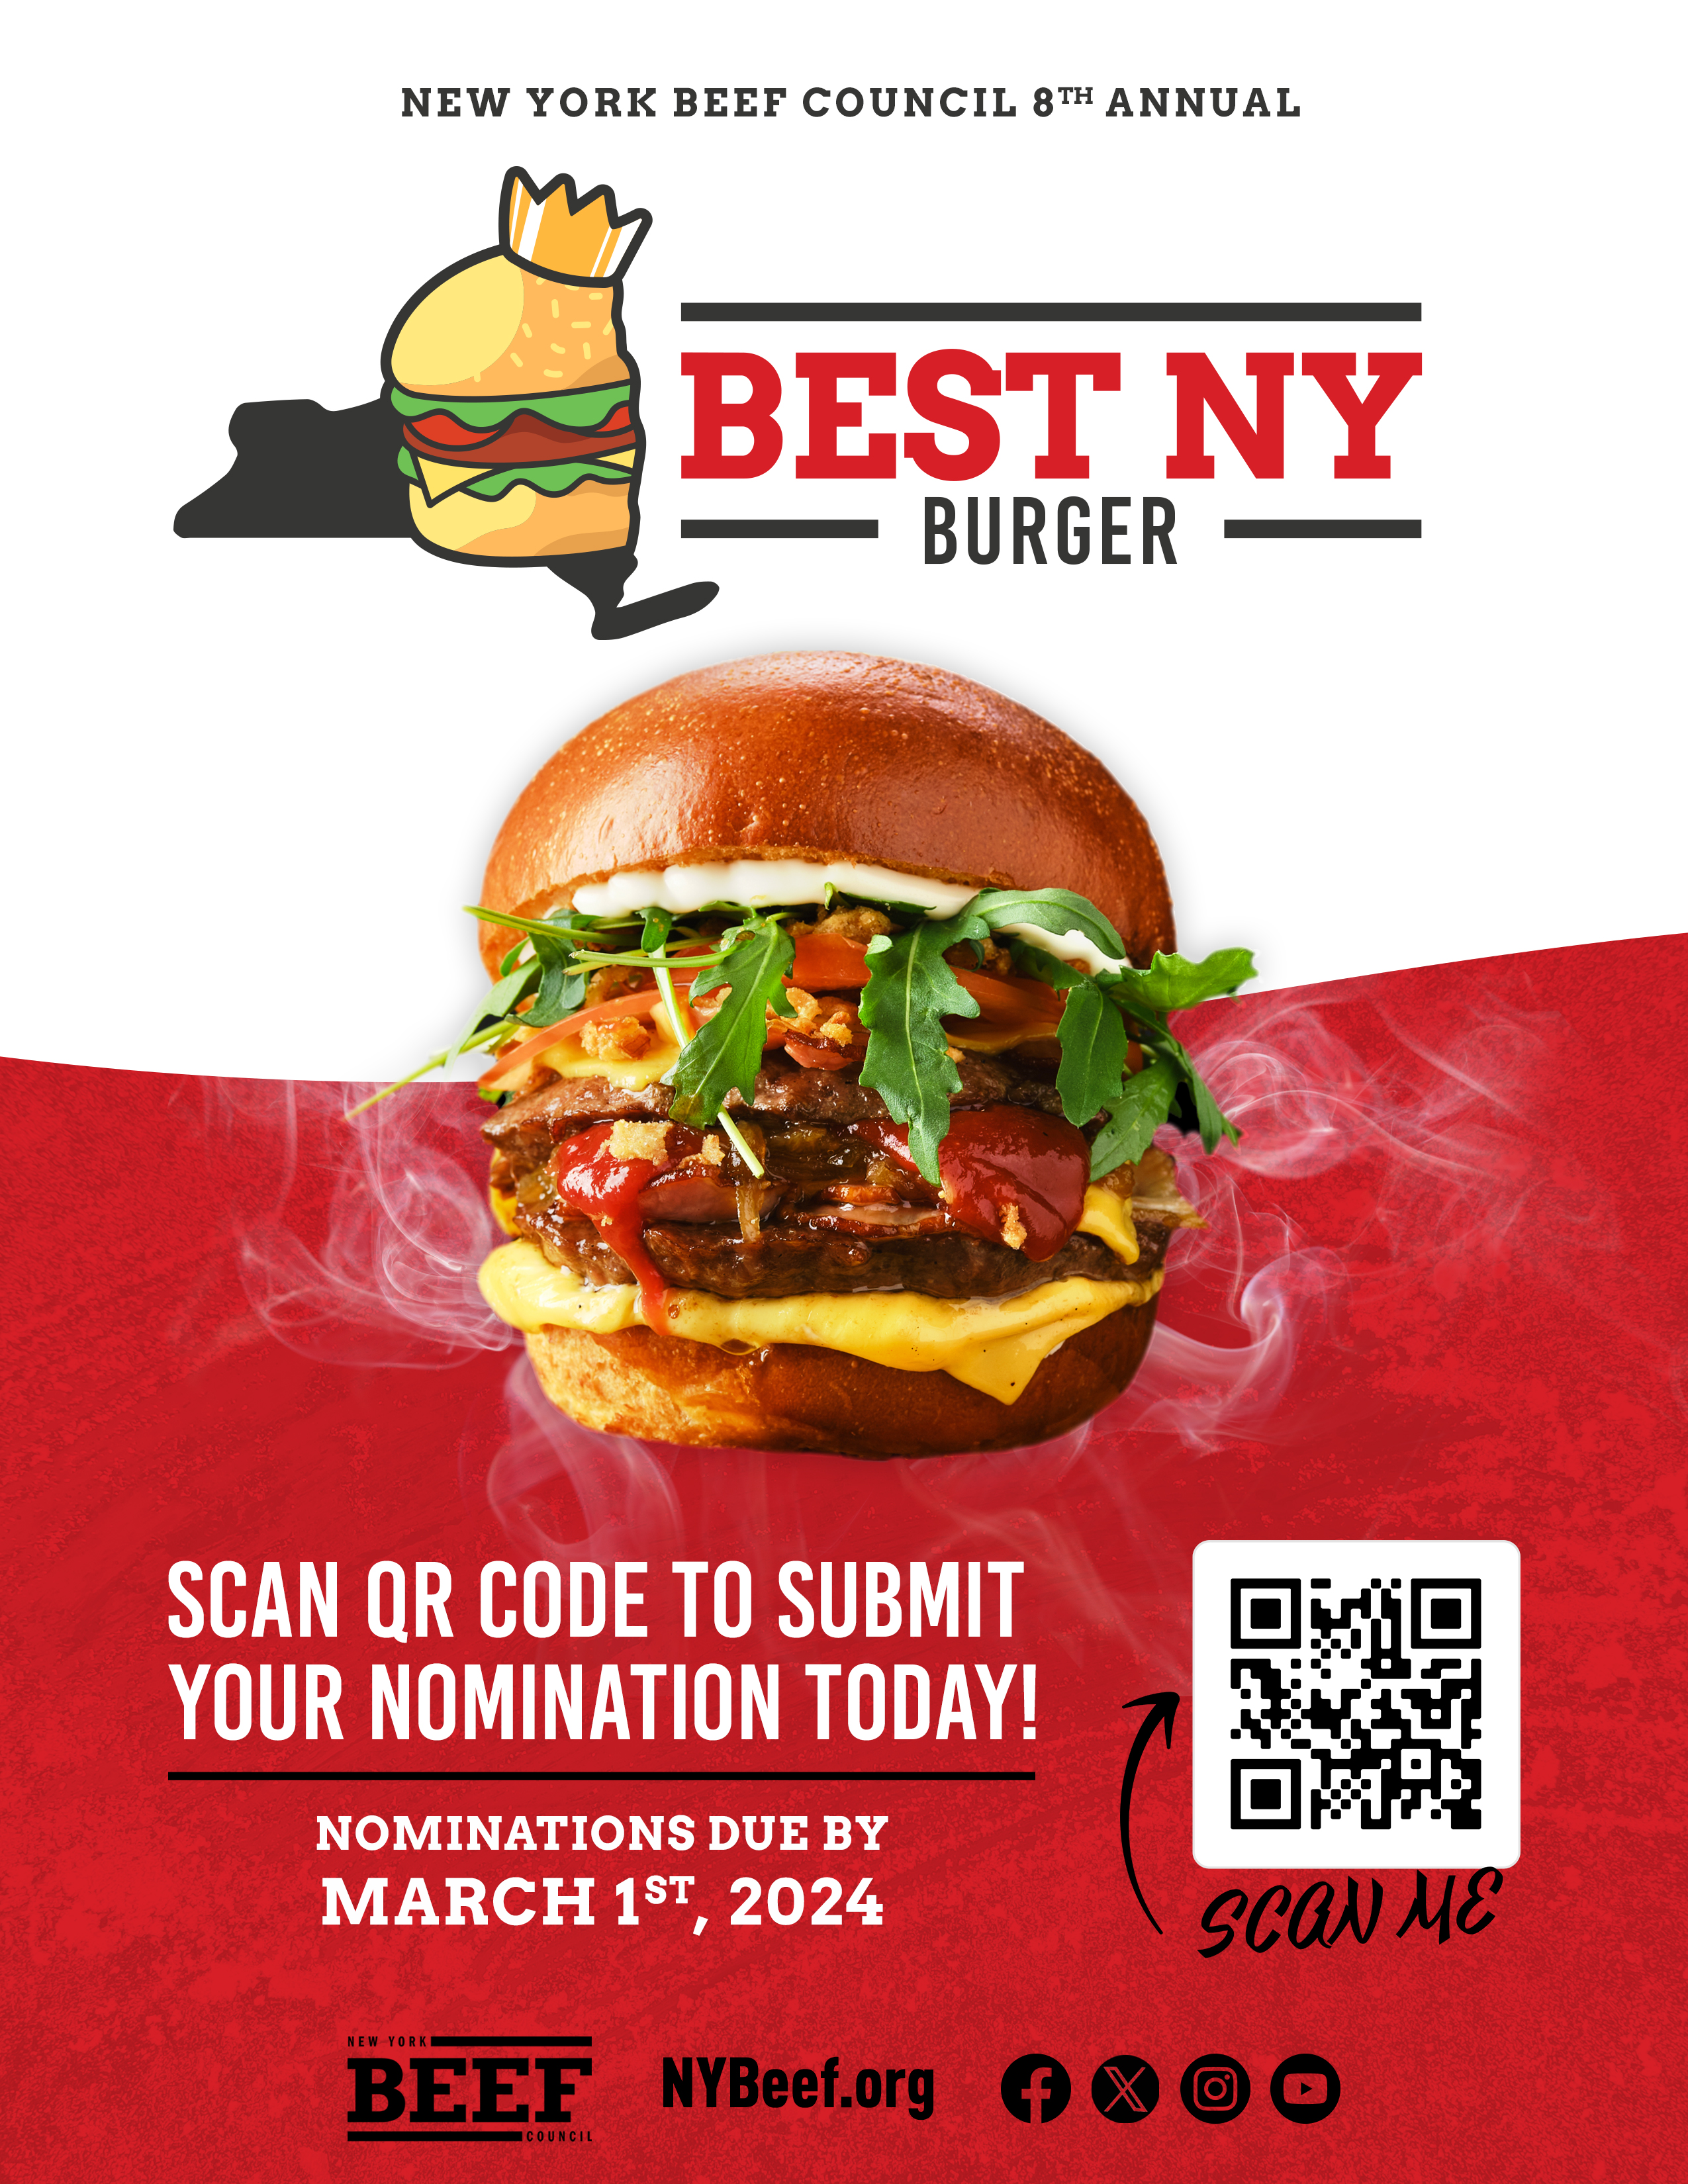 The search begins for the Best NY Burger 